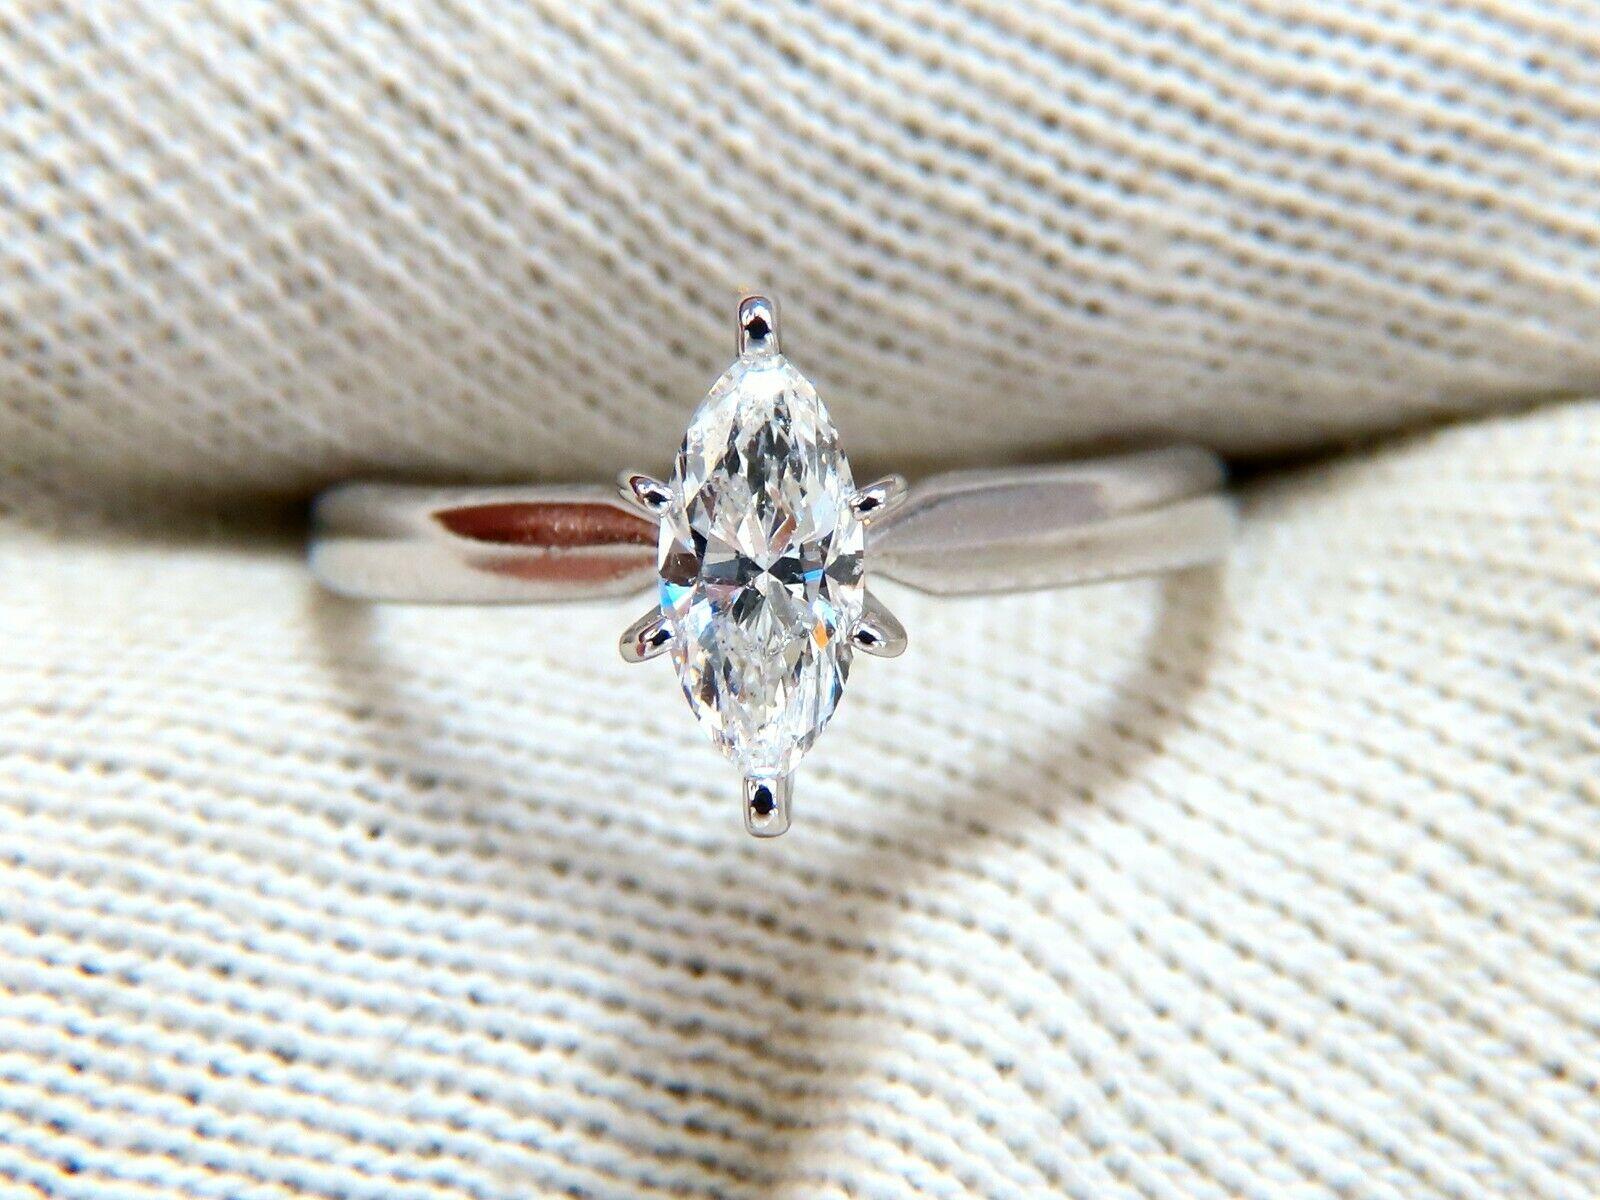 Details about   CLEARANCE-----STAINLESS STEEL MARQUISE CUT CZ ENGAGEMENT & WEDDING RING SET SZ 5 